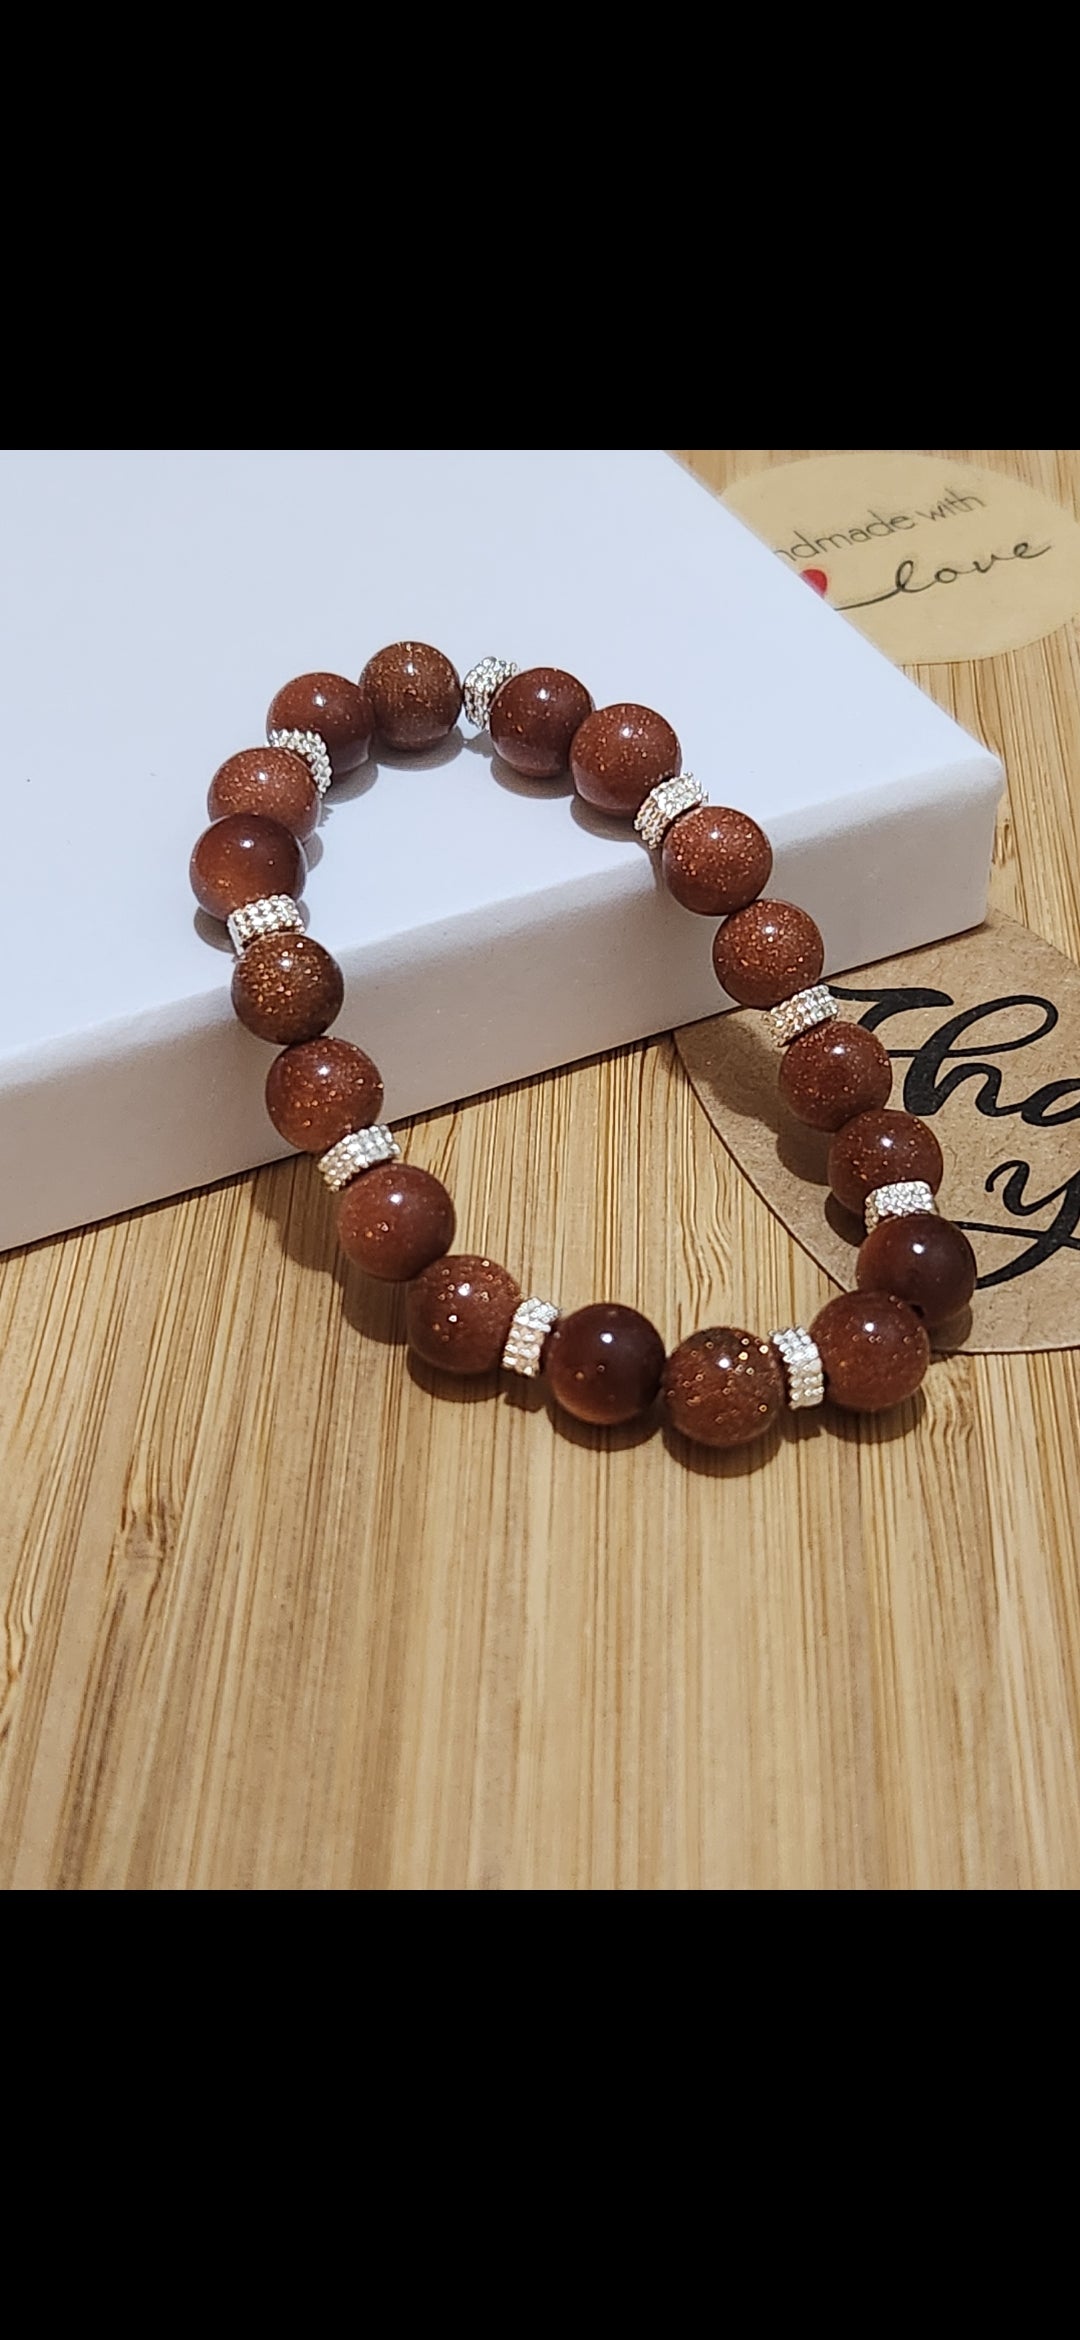 Sandstone bracelet with  accents - confidence - creativity - dreaming